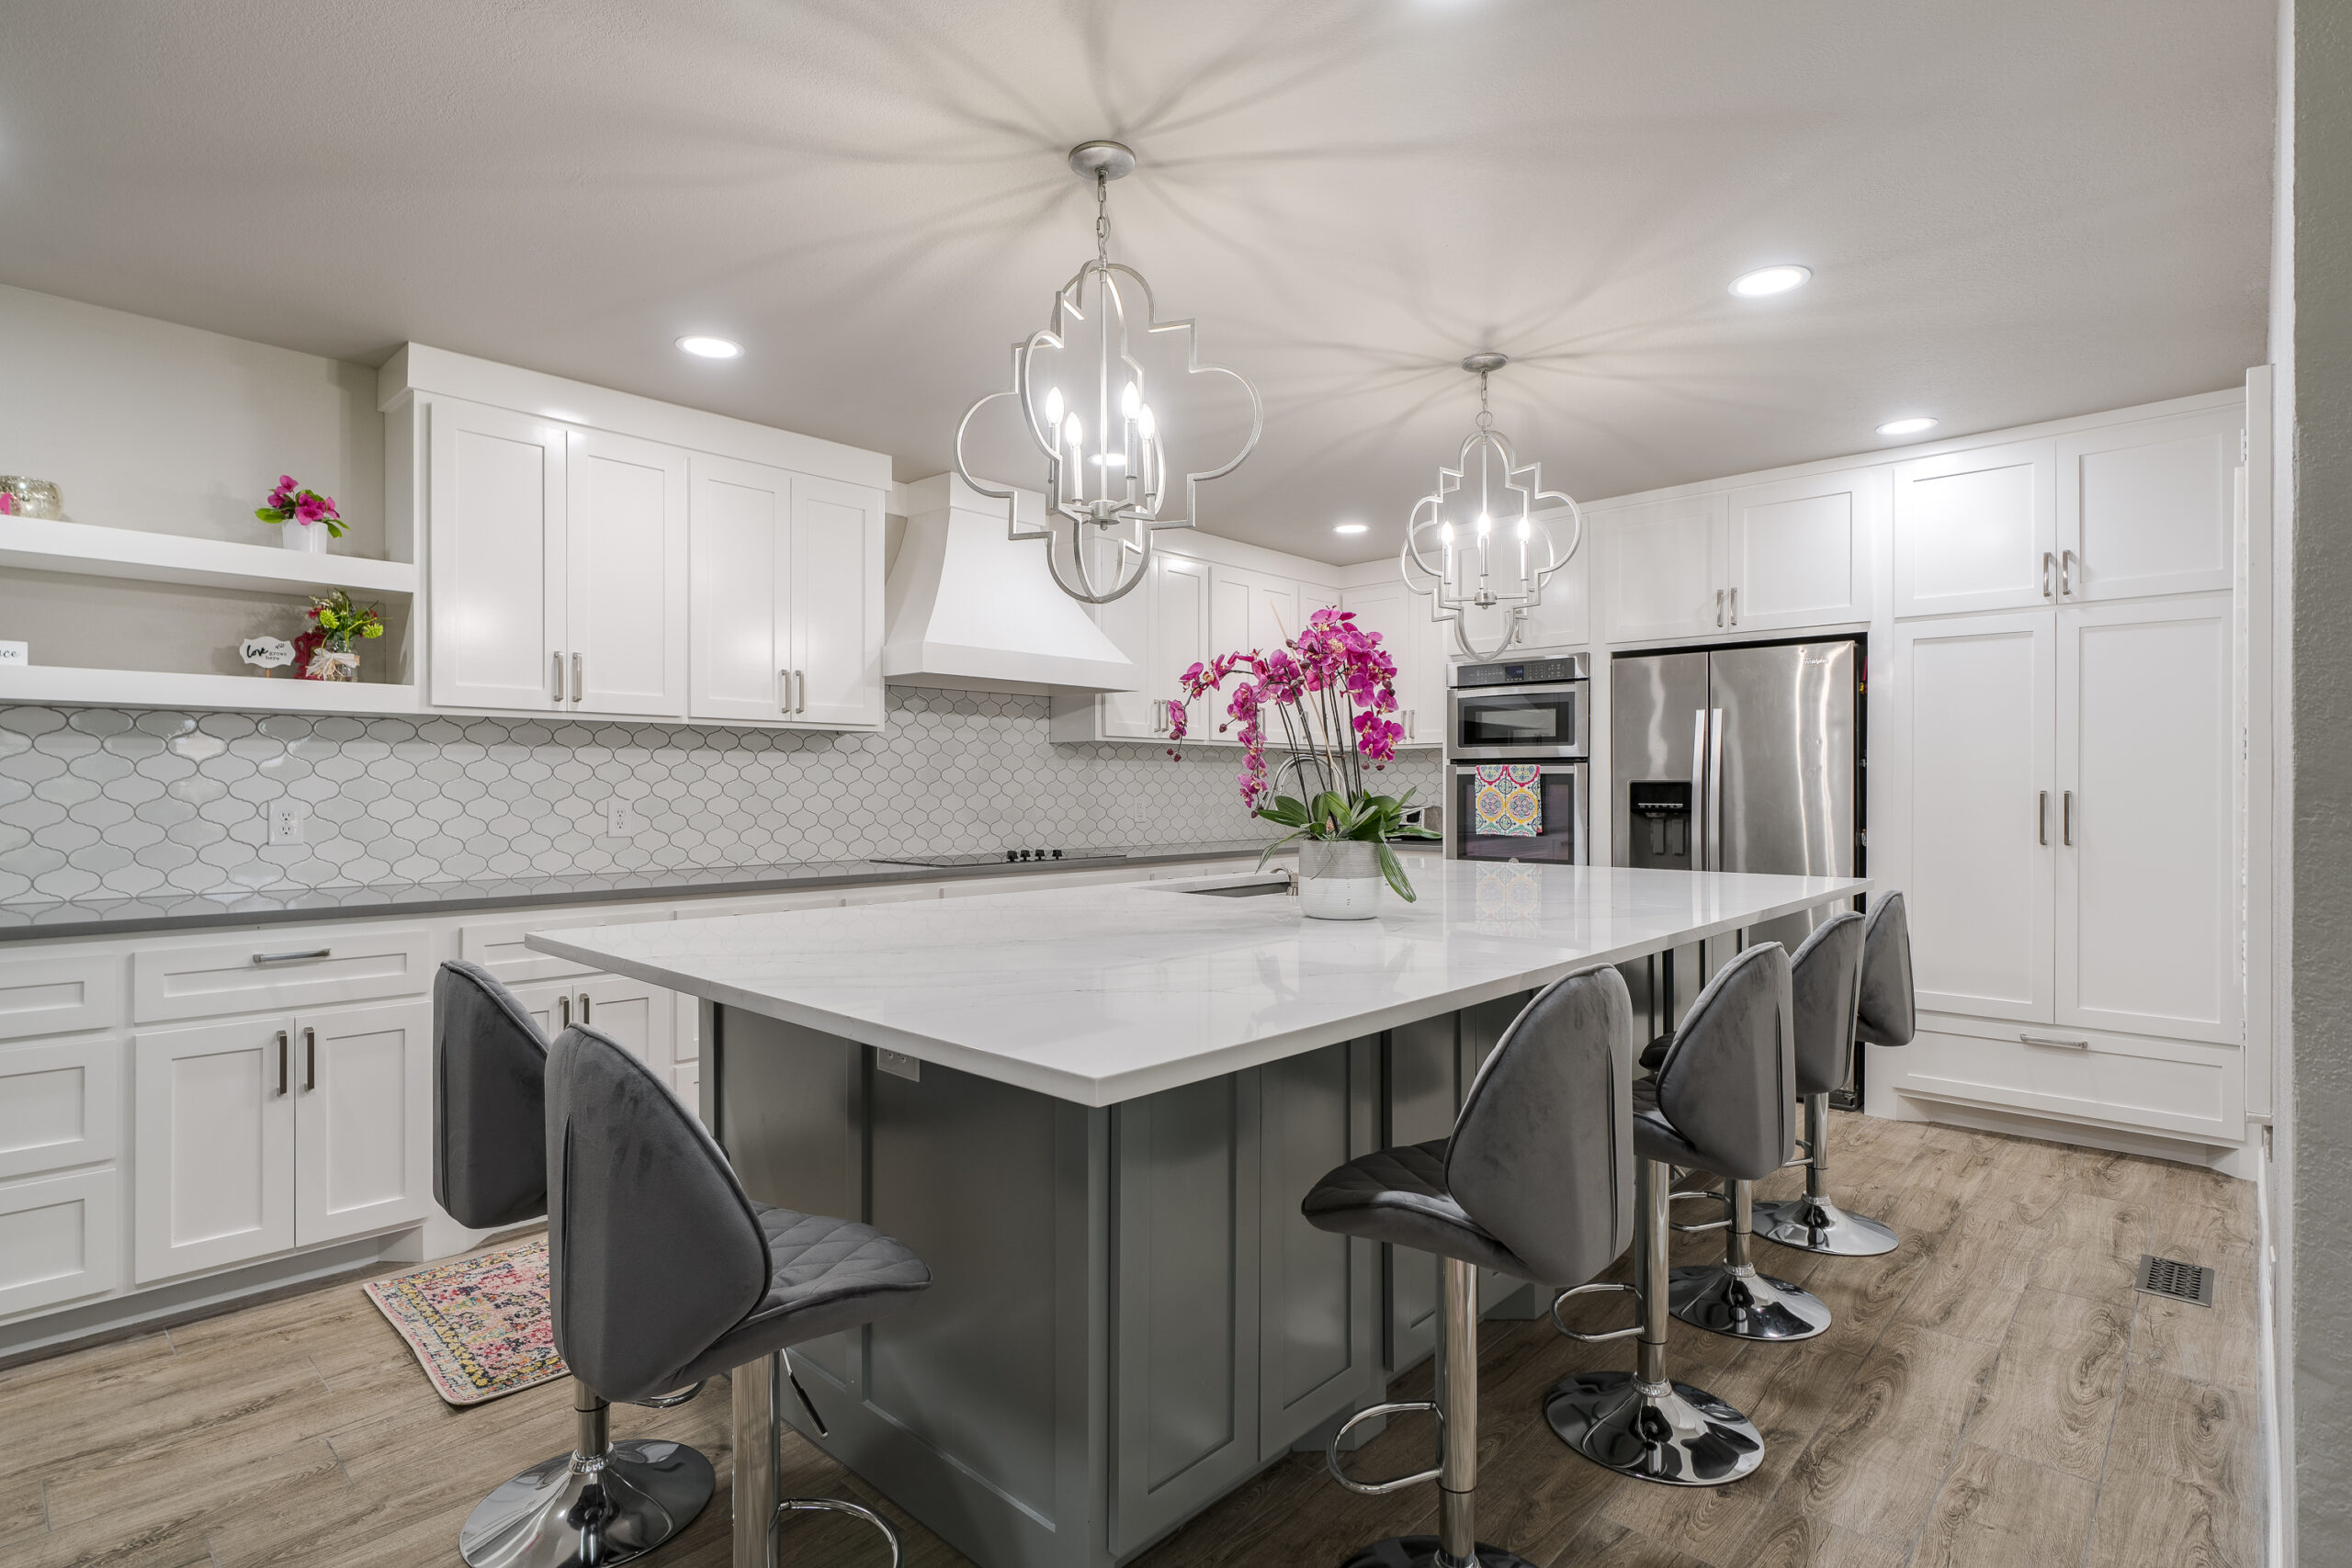 Where in Nichols Hills can I find kitchen remodeling experts?